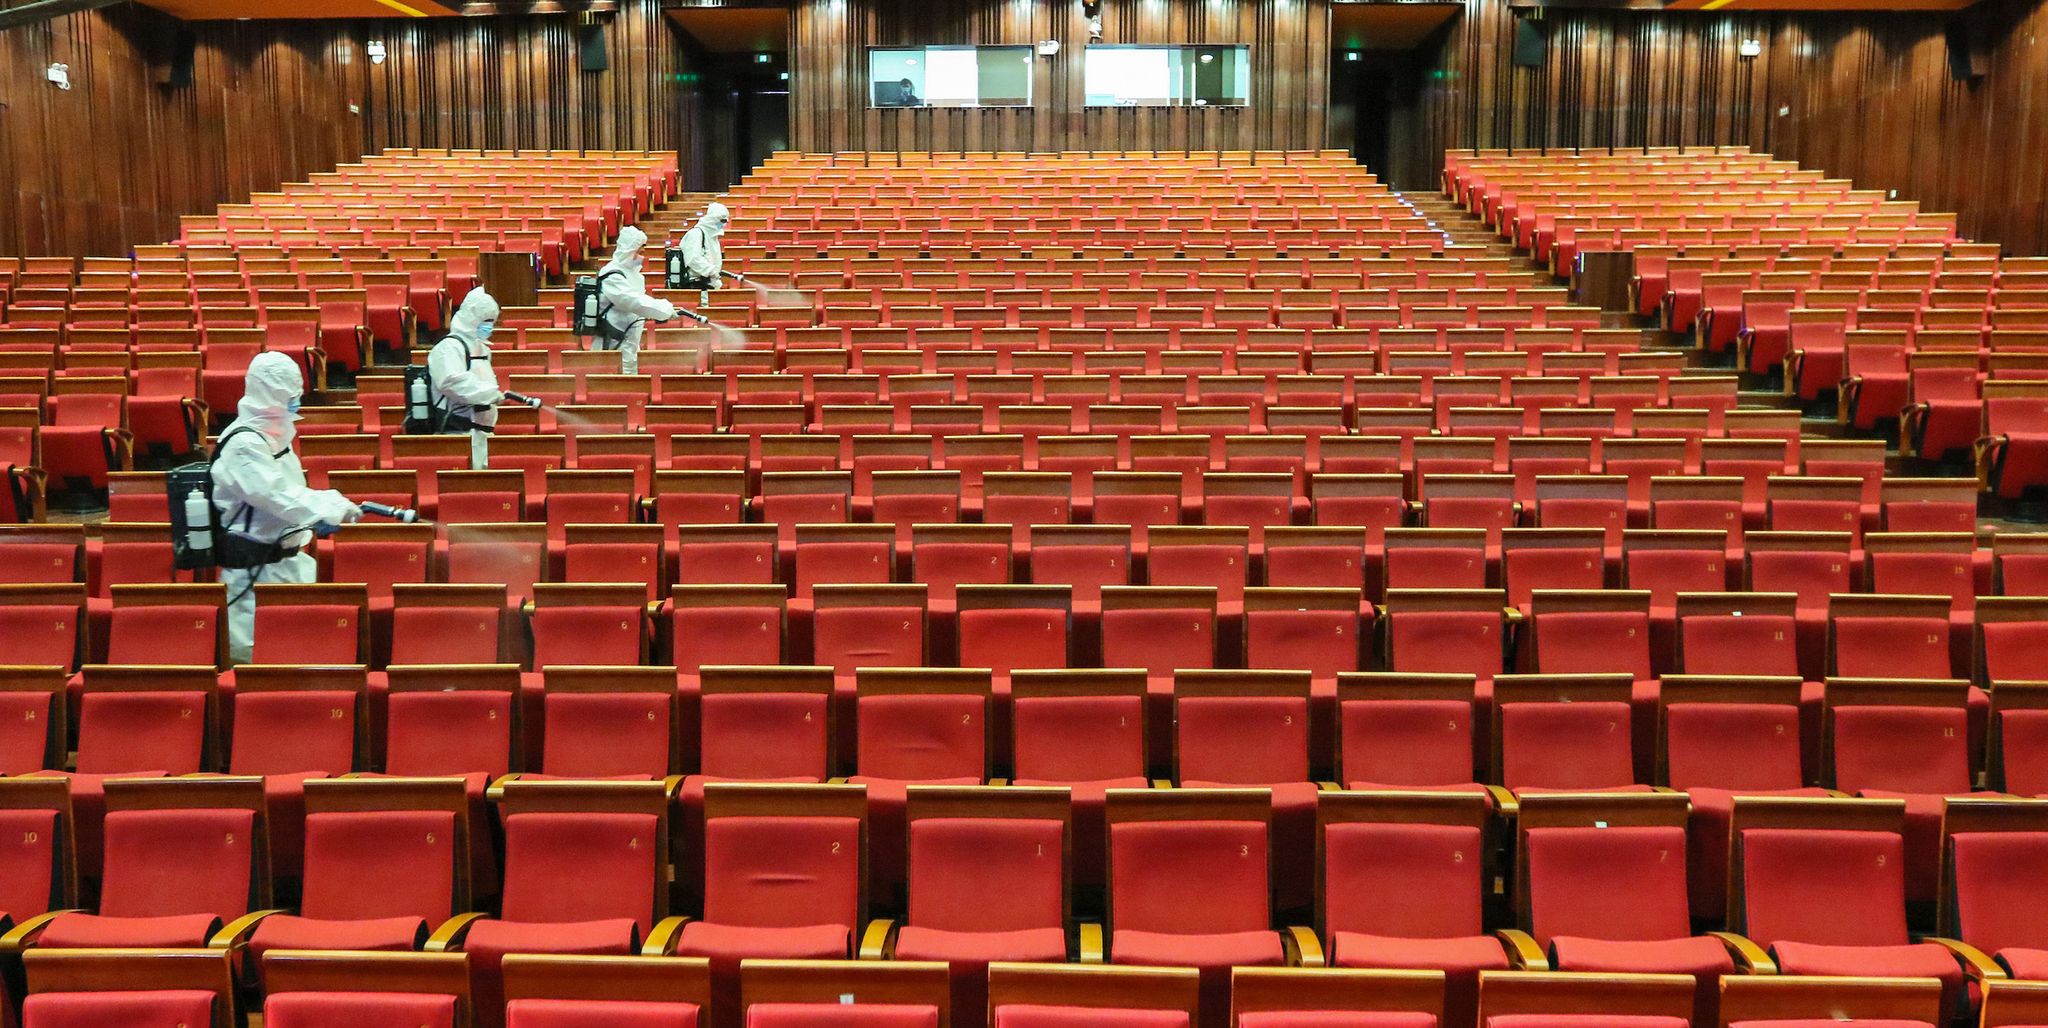 topshot   this photo taken on may 12, 2020 shows staff members spraying disinfectant at a theatre as it prepares to reopen in yantai in china's eastern shandong province   china's top decision making body has given the green light for cinemas, entertainment venues and sports facilities nationwide to reopen after several months of closures photo by str  afp  china out photo by strafp via getty images